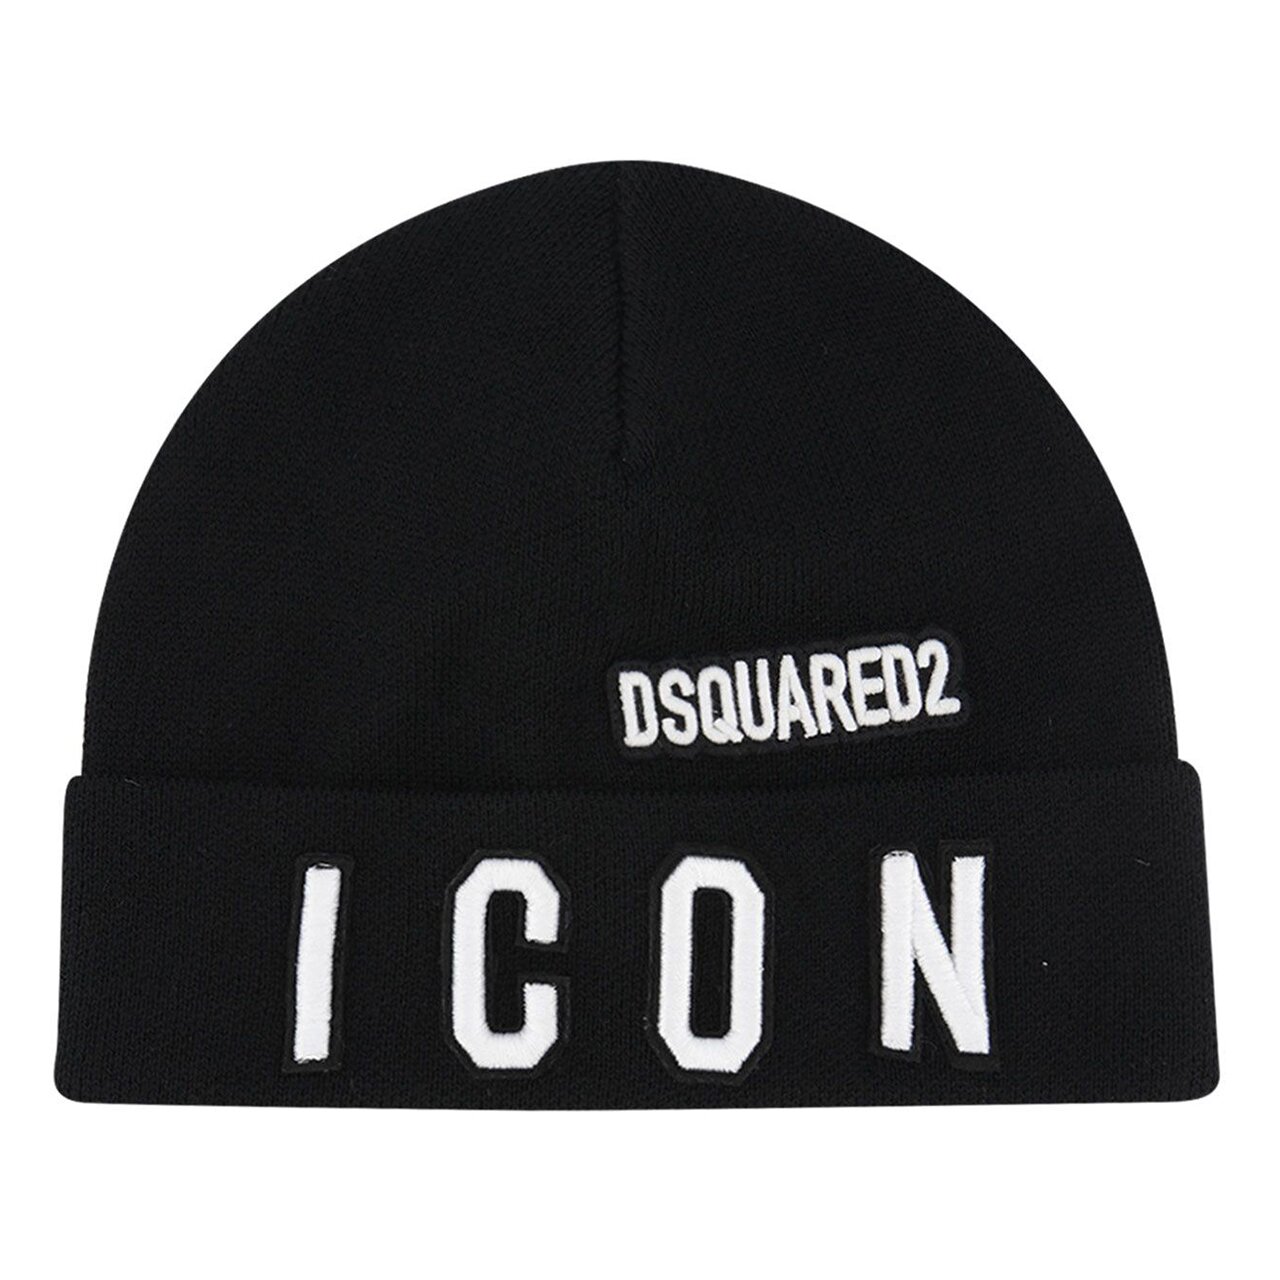 Ijsbeer Disco geld dsquared-hat-DQ04IE-D003K-DQ900 beany - Fashion for Kids & Teens